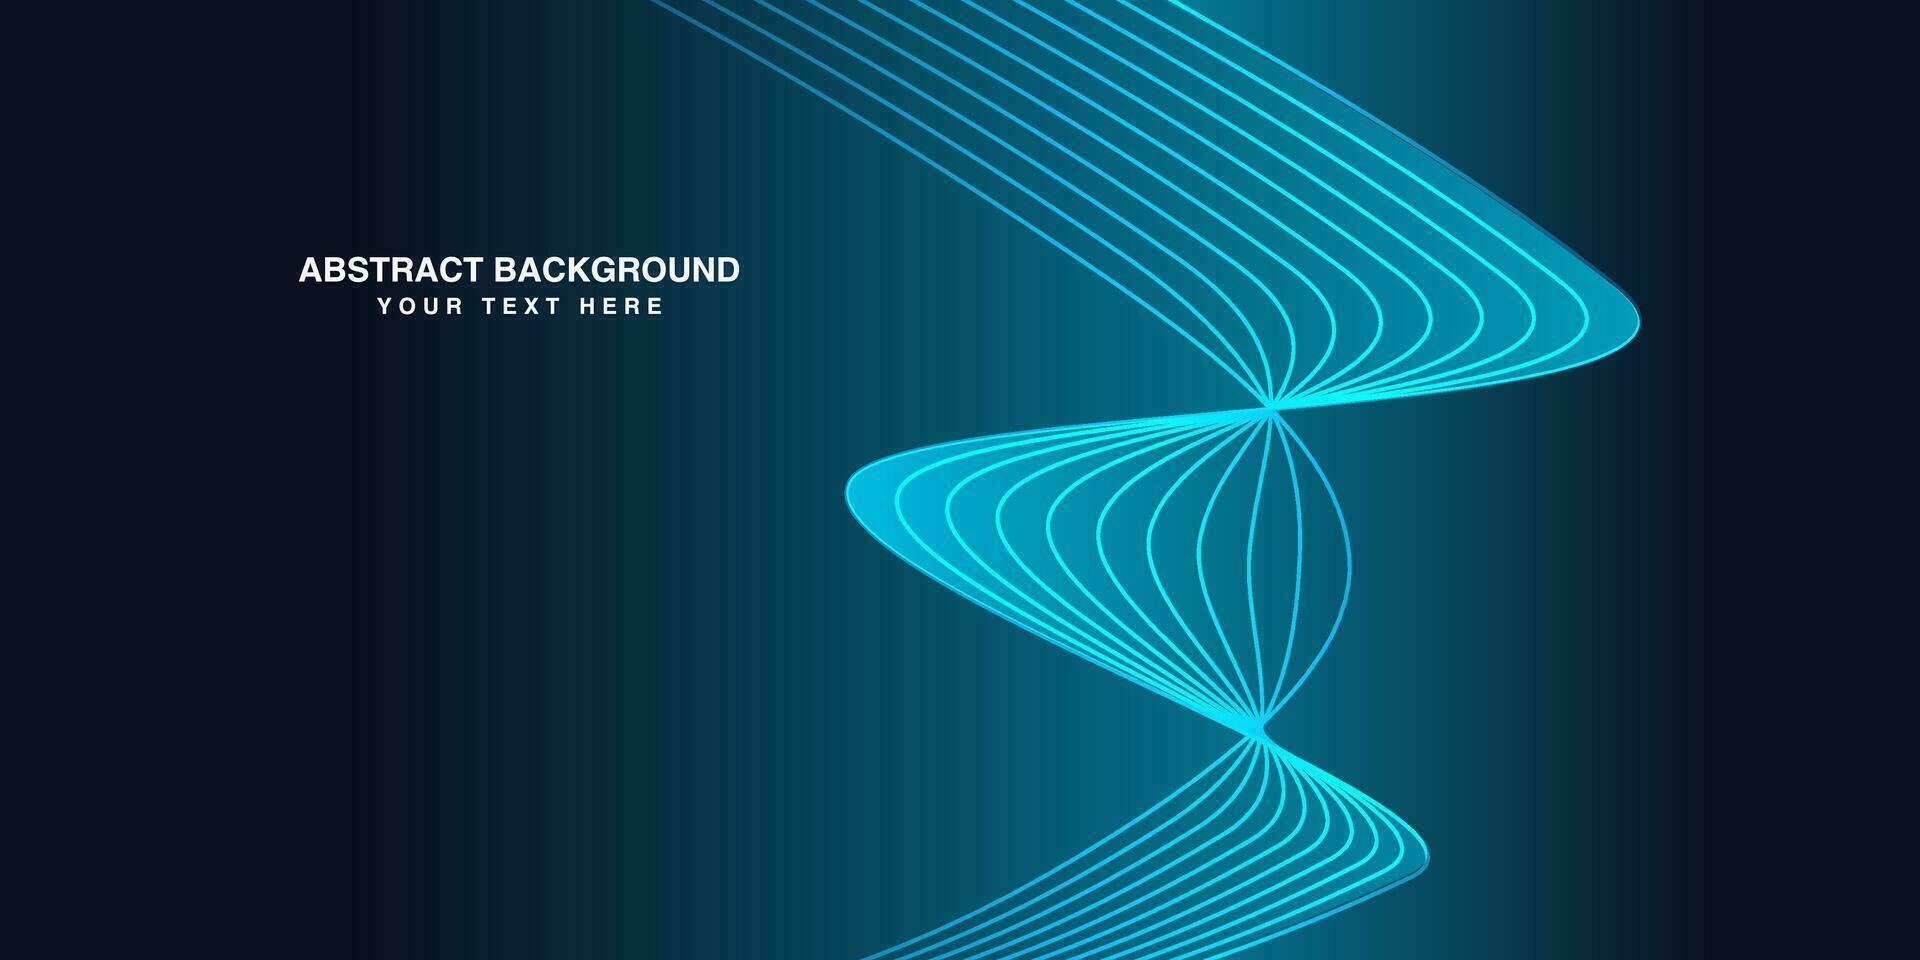 luxurious Abstract Background design illustration, Blue Background creative vector